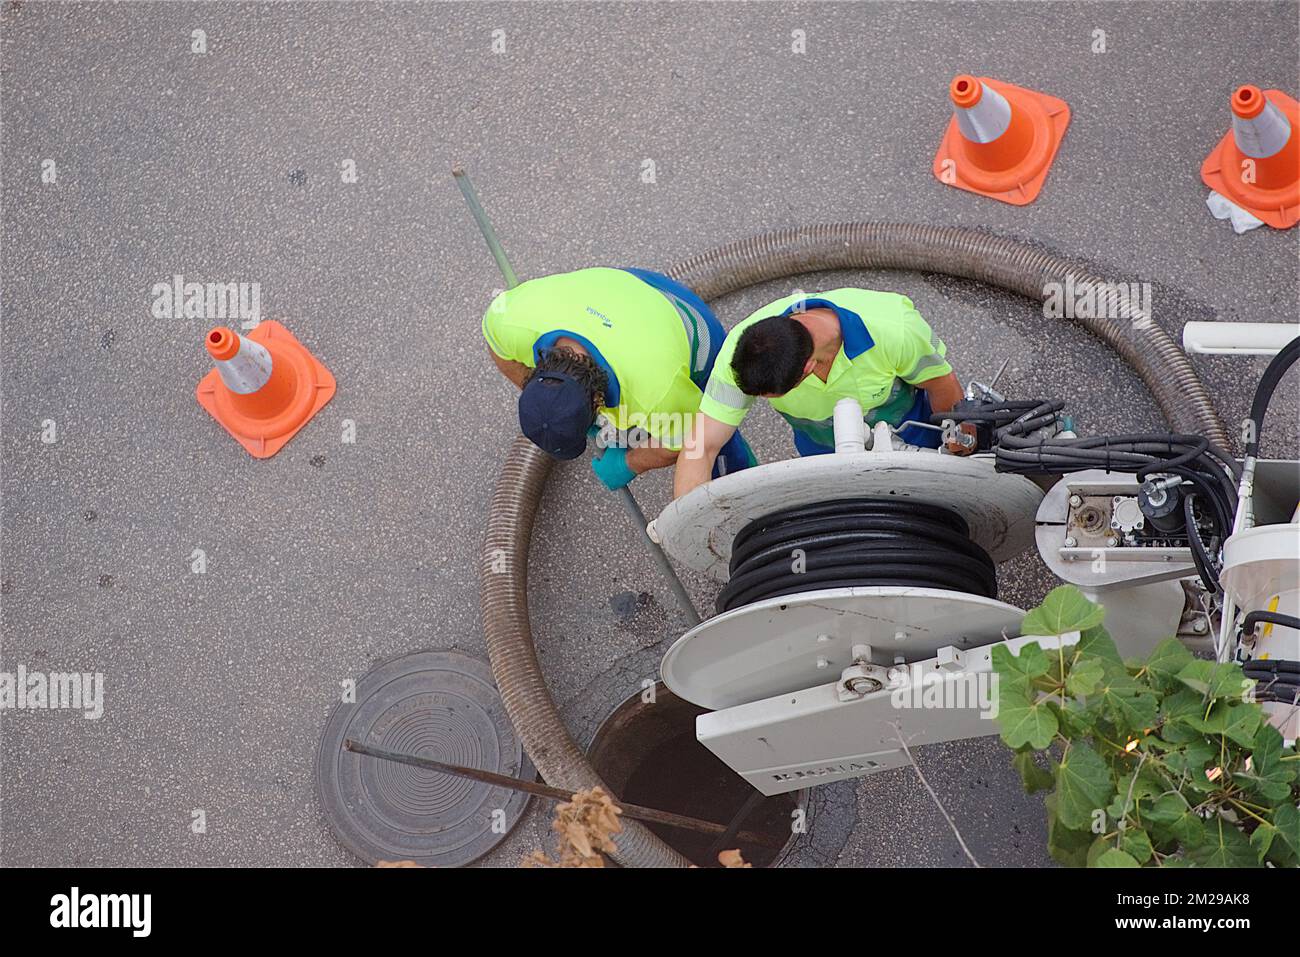 Sewers cleaning | Nettoyage des égouts 31/08/2017 Stock Photo